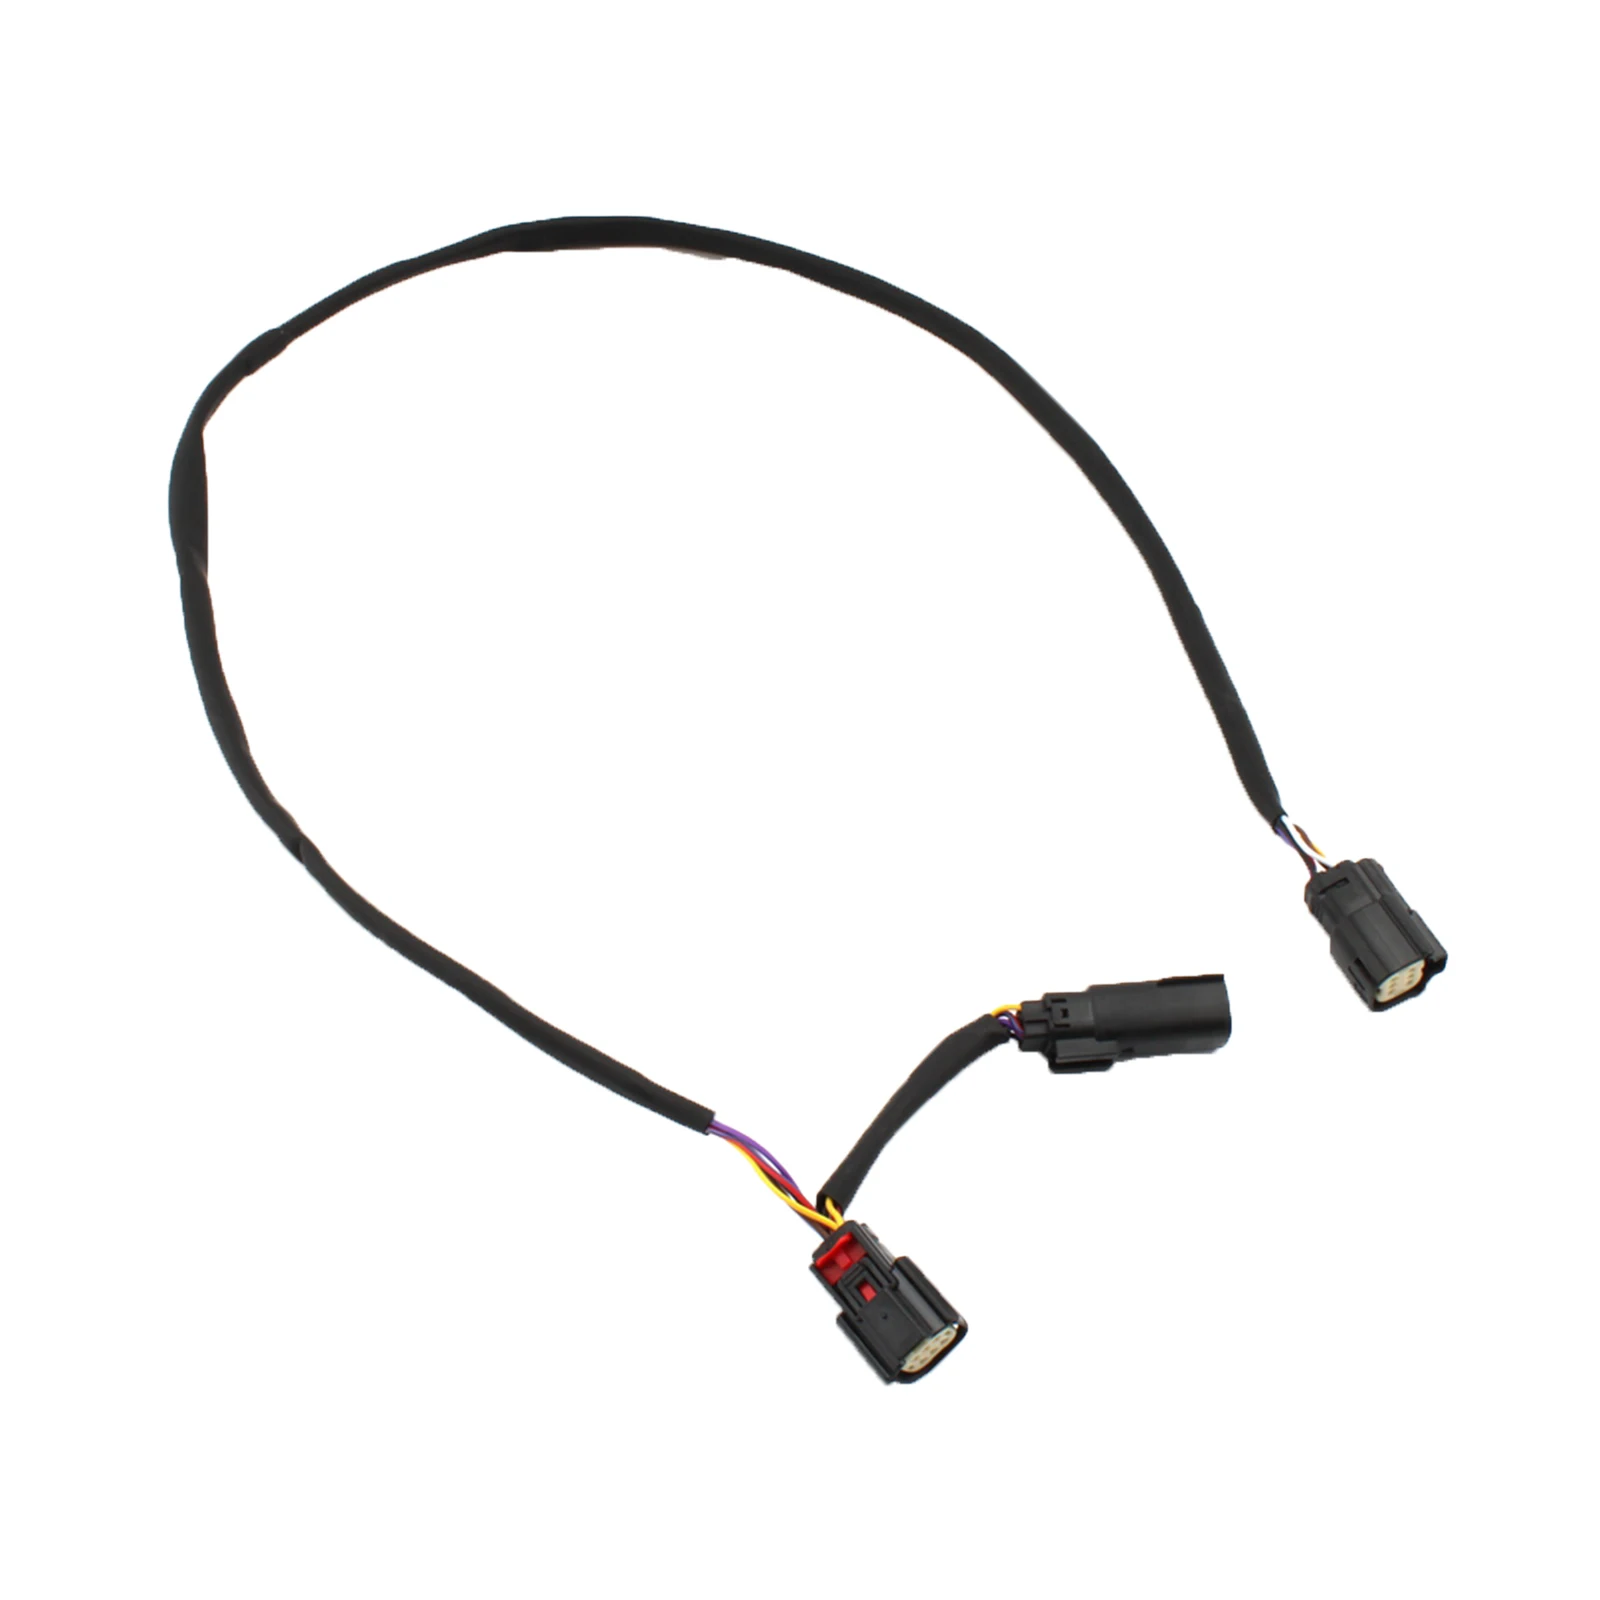 Quick Disconnect Wiring Harness Replacement suitable for Harley Davidson, Accessories